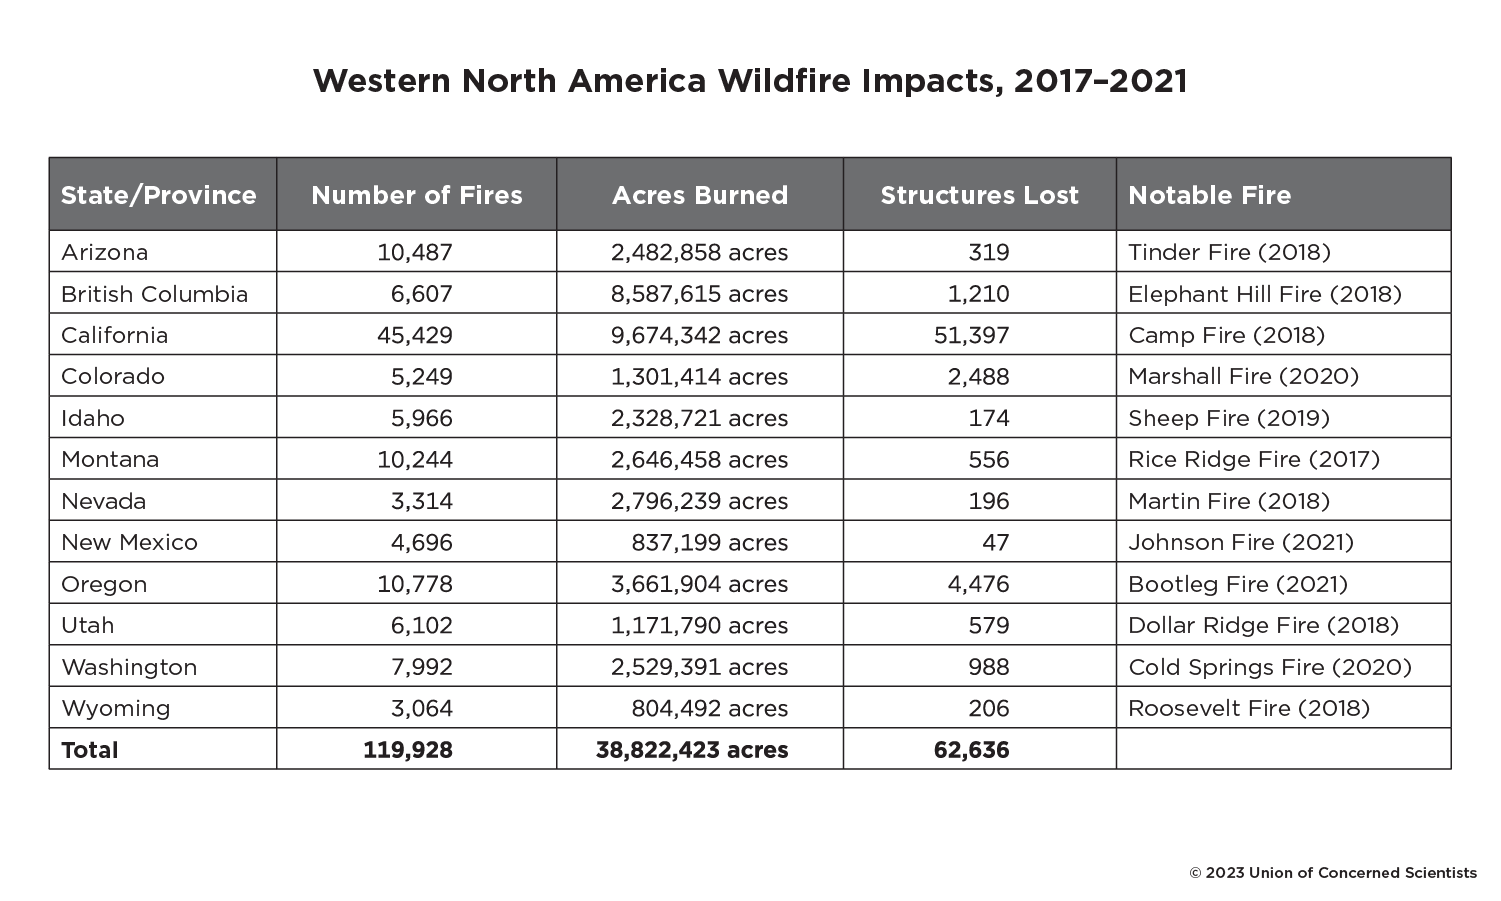 A table showing various fire impacts across teh western US. 